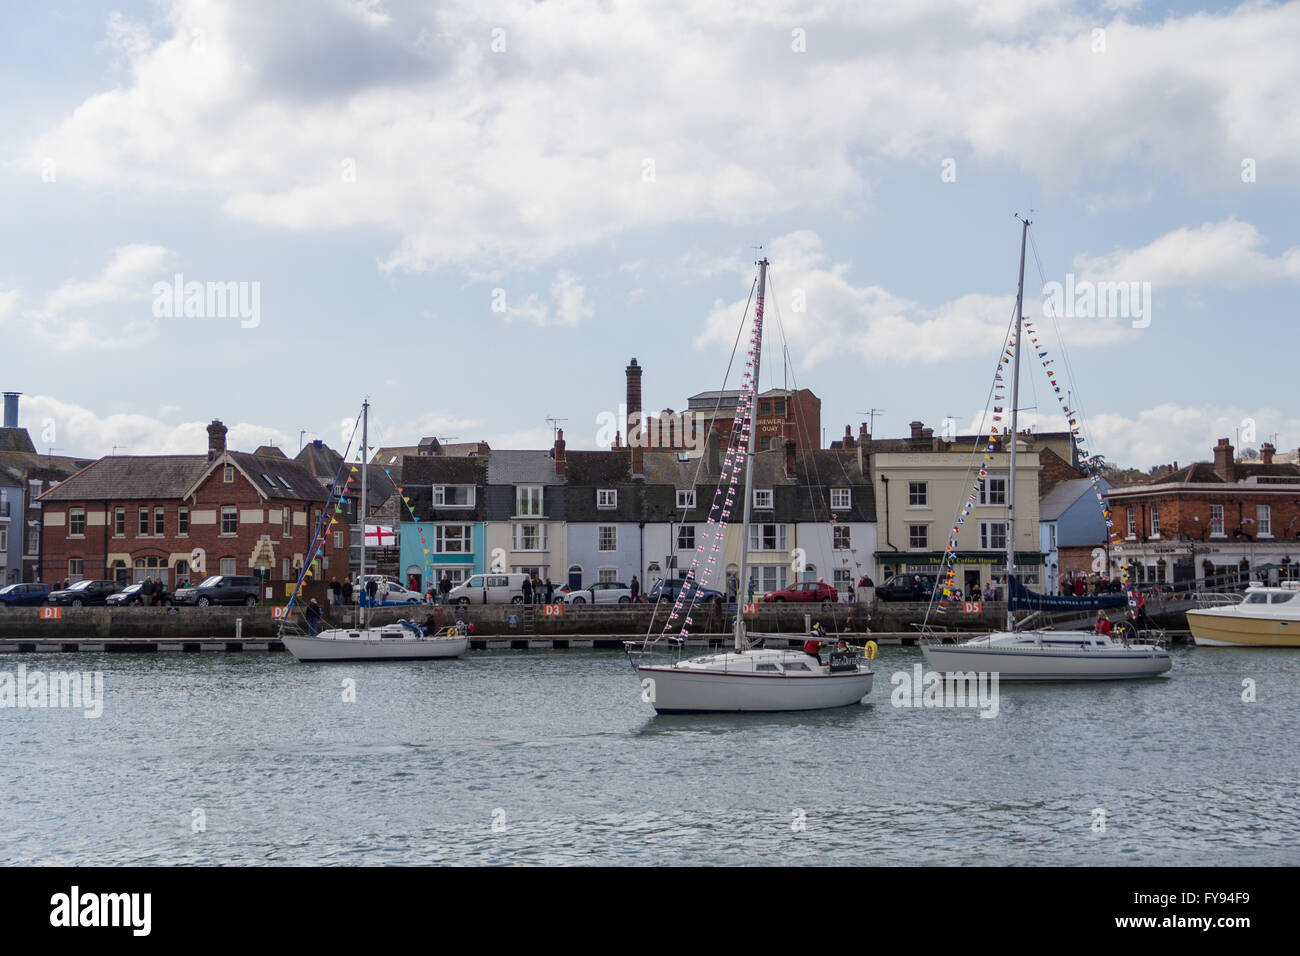 Weymouth, England. 23 April 2016. Queen's 90th Birthday Floating Tribute. Sailing boats in harbour decked with flags. Credit:  Frances Underwood/Alamy Live News Stock Photo